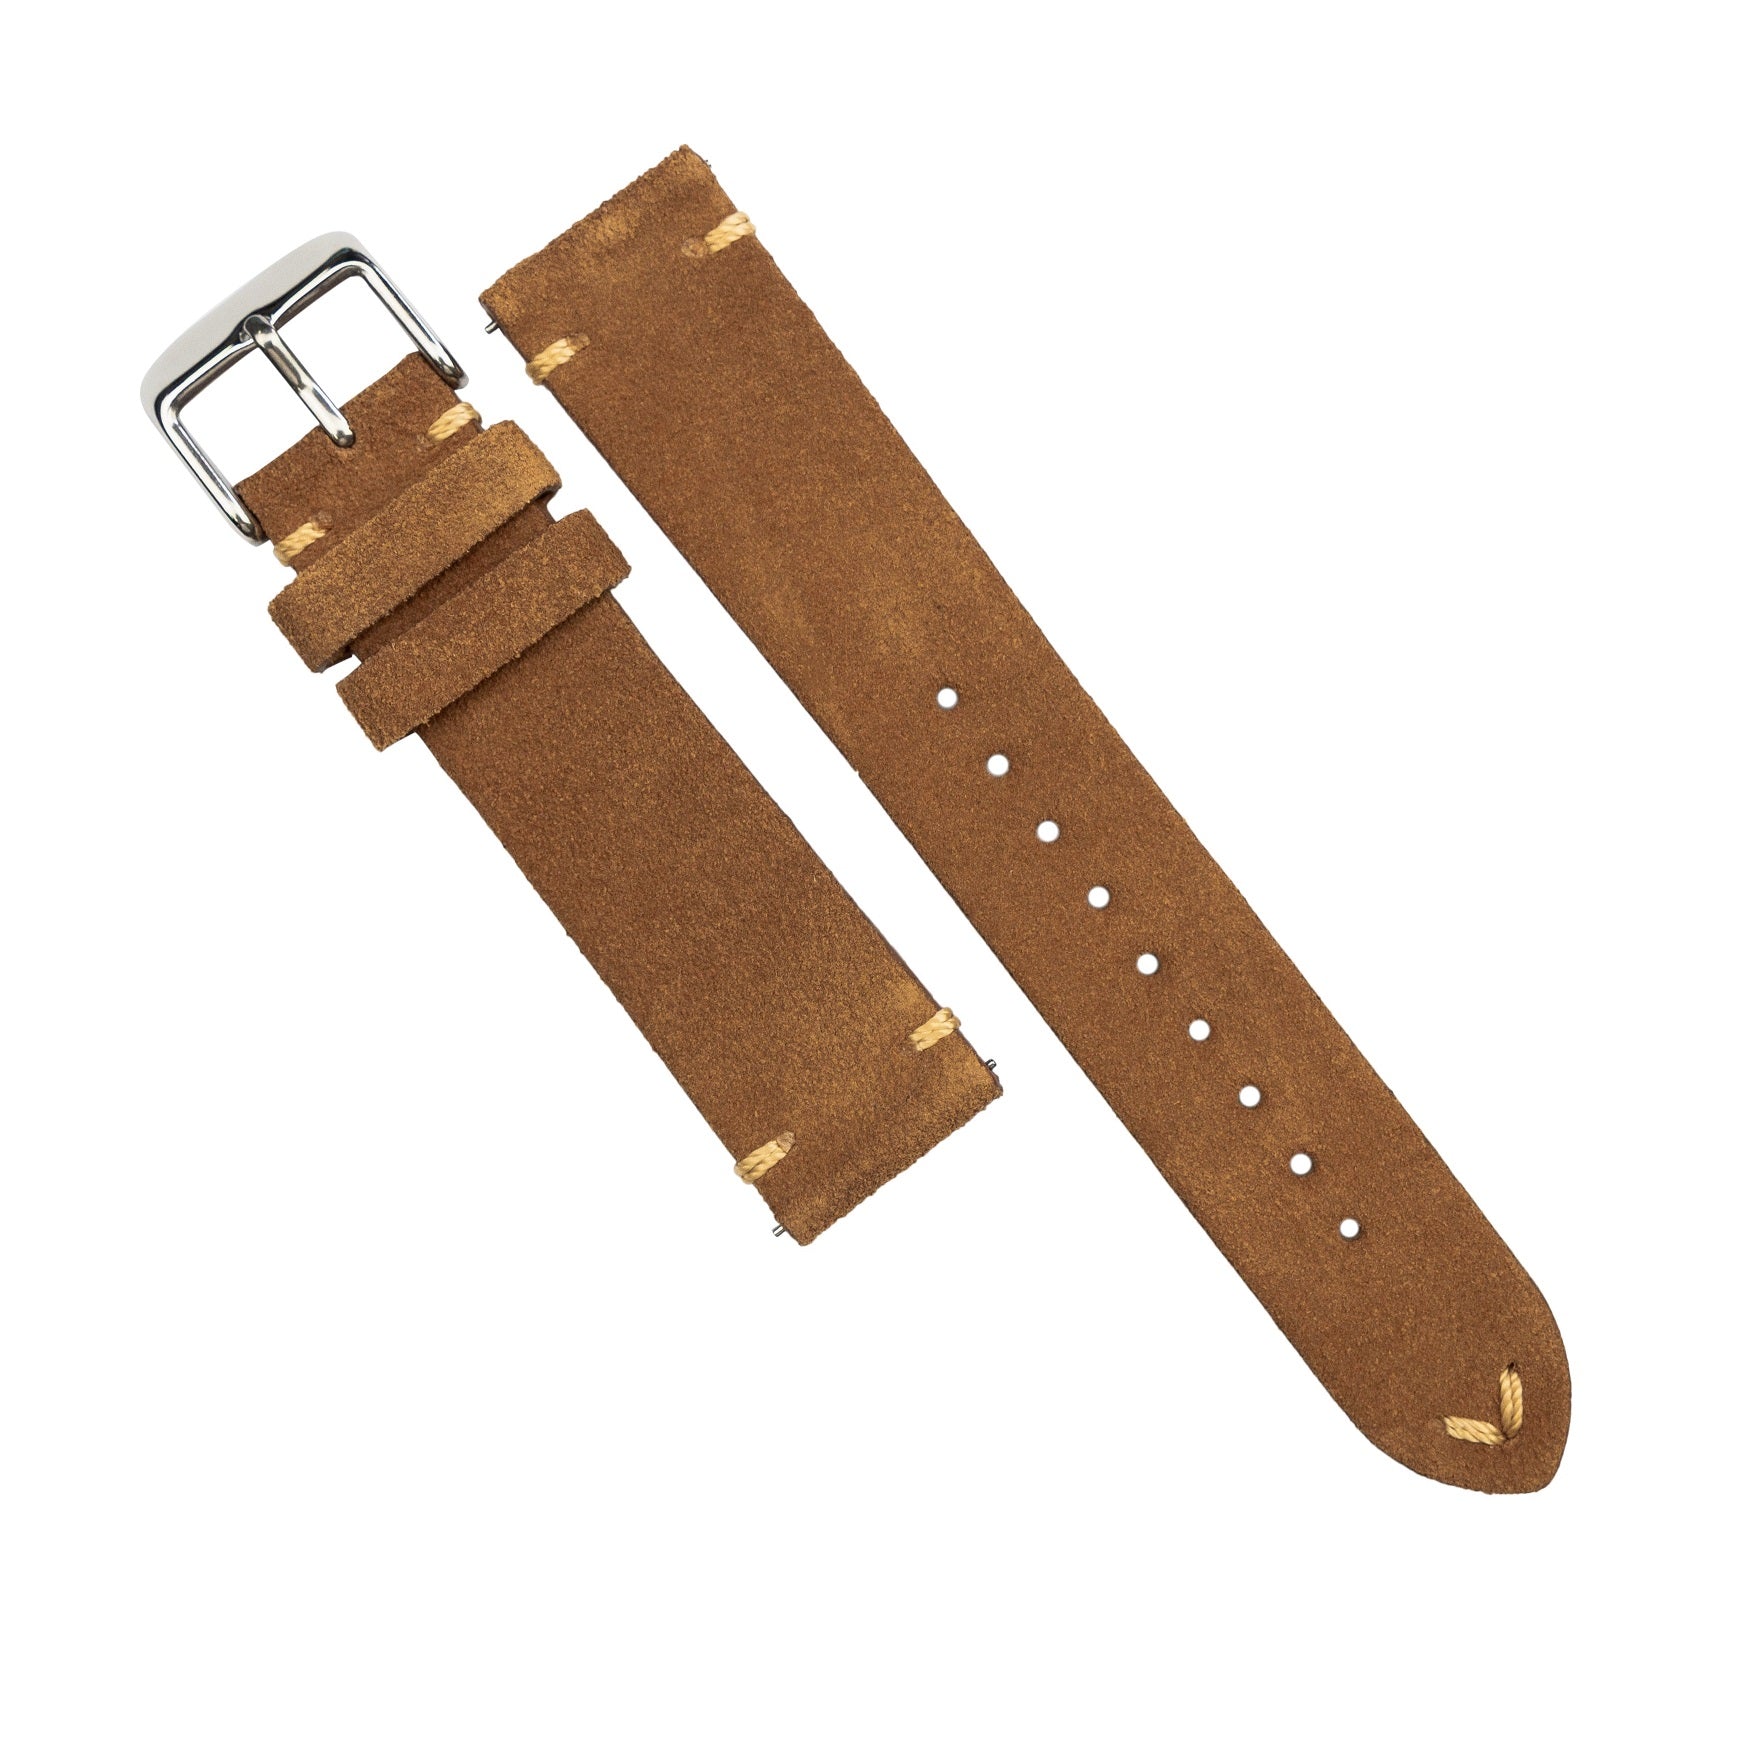 Premium Vintage Suede Leather Watch Strap in Tan (18mm) - Nomad Watch Works MY